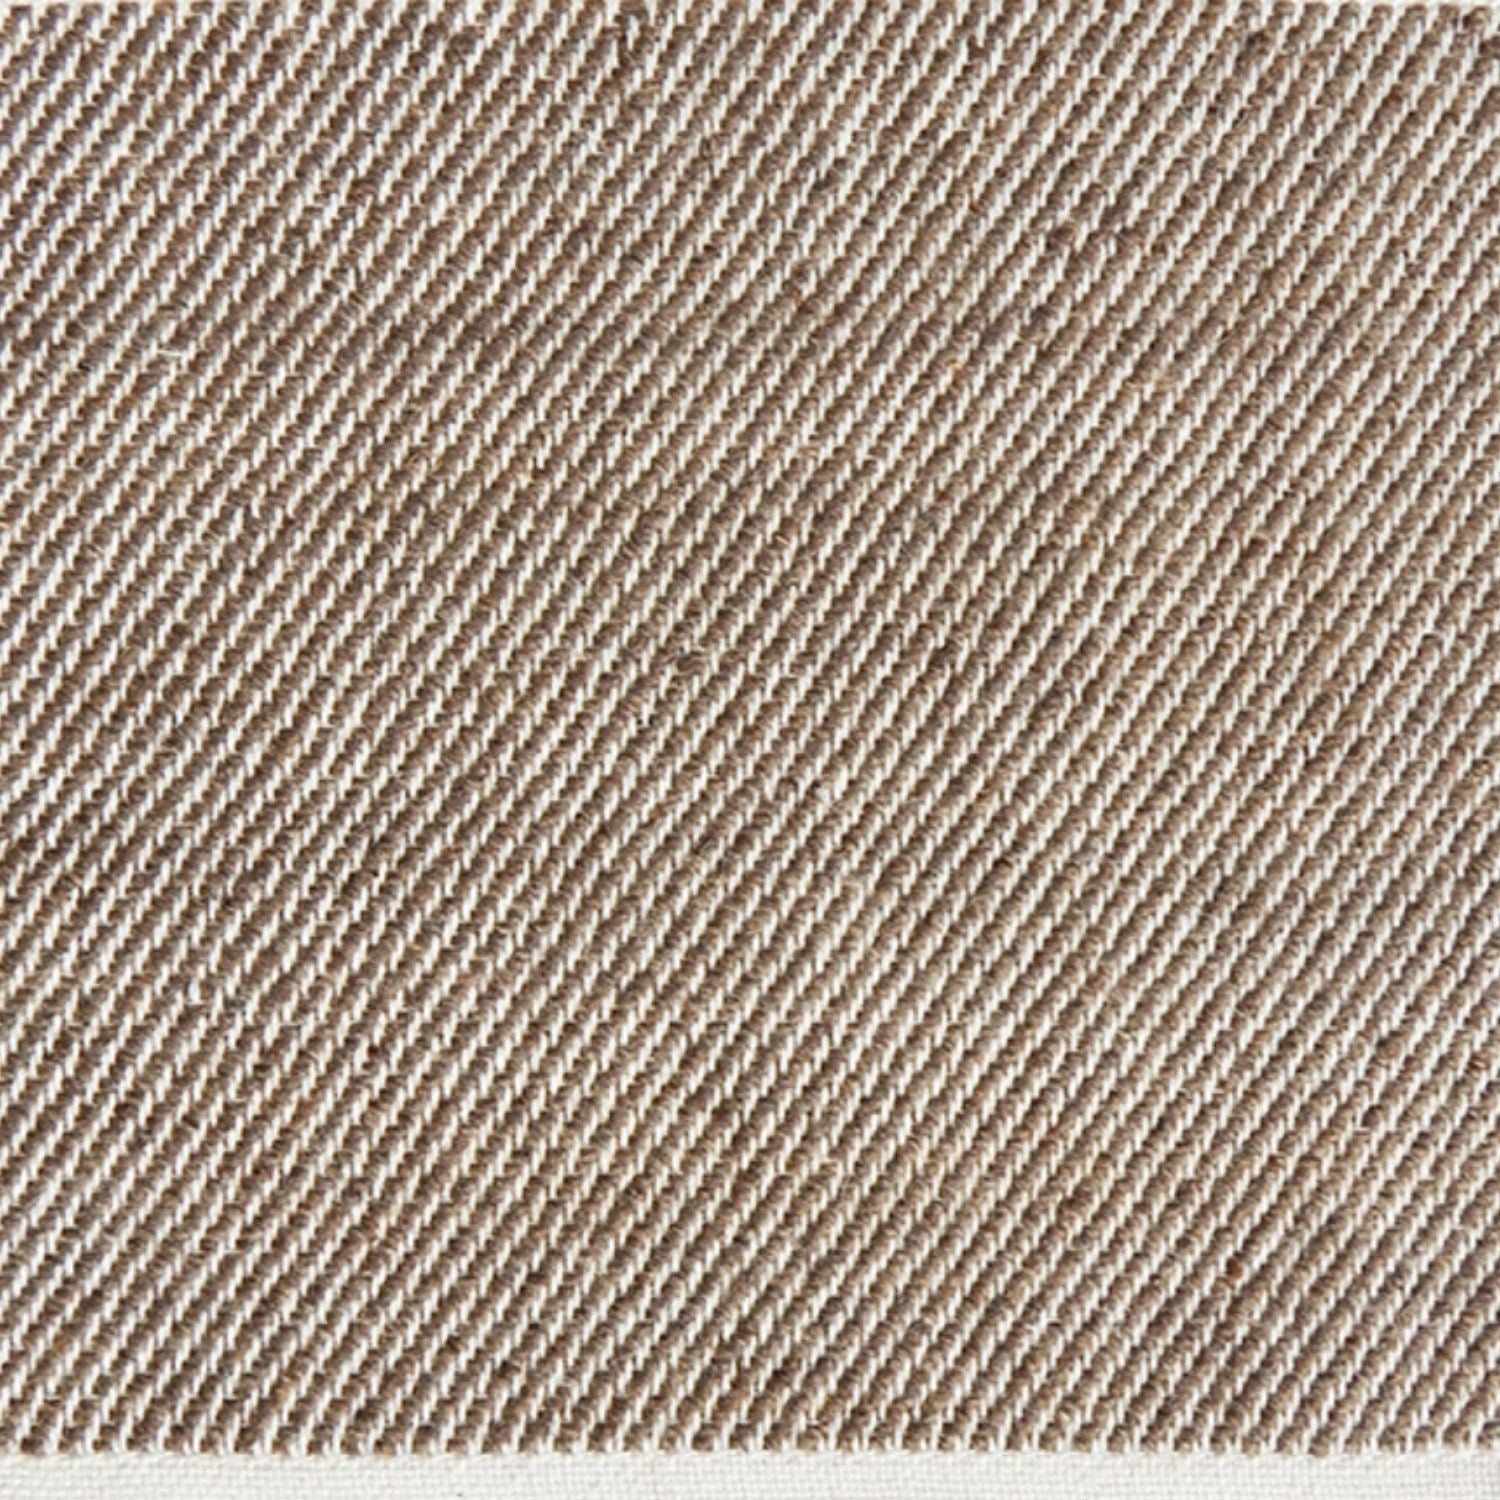 Detail of a flatwoven rug, with a brown and white twill design